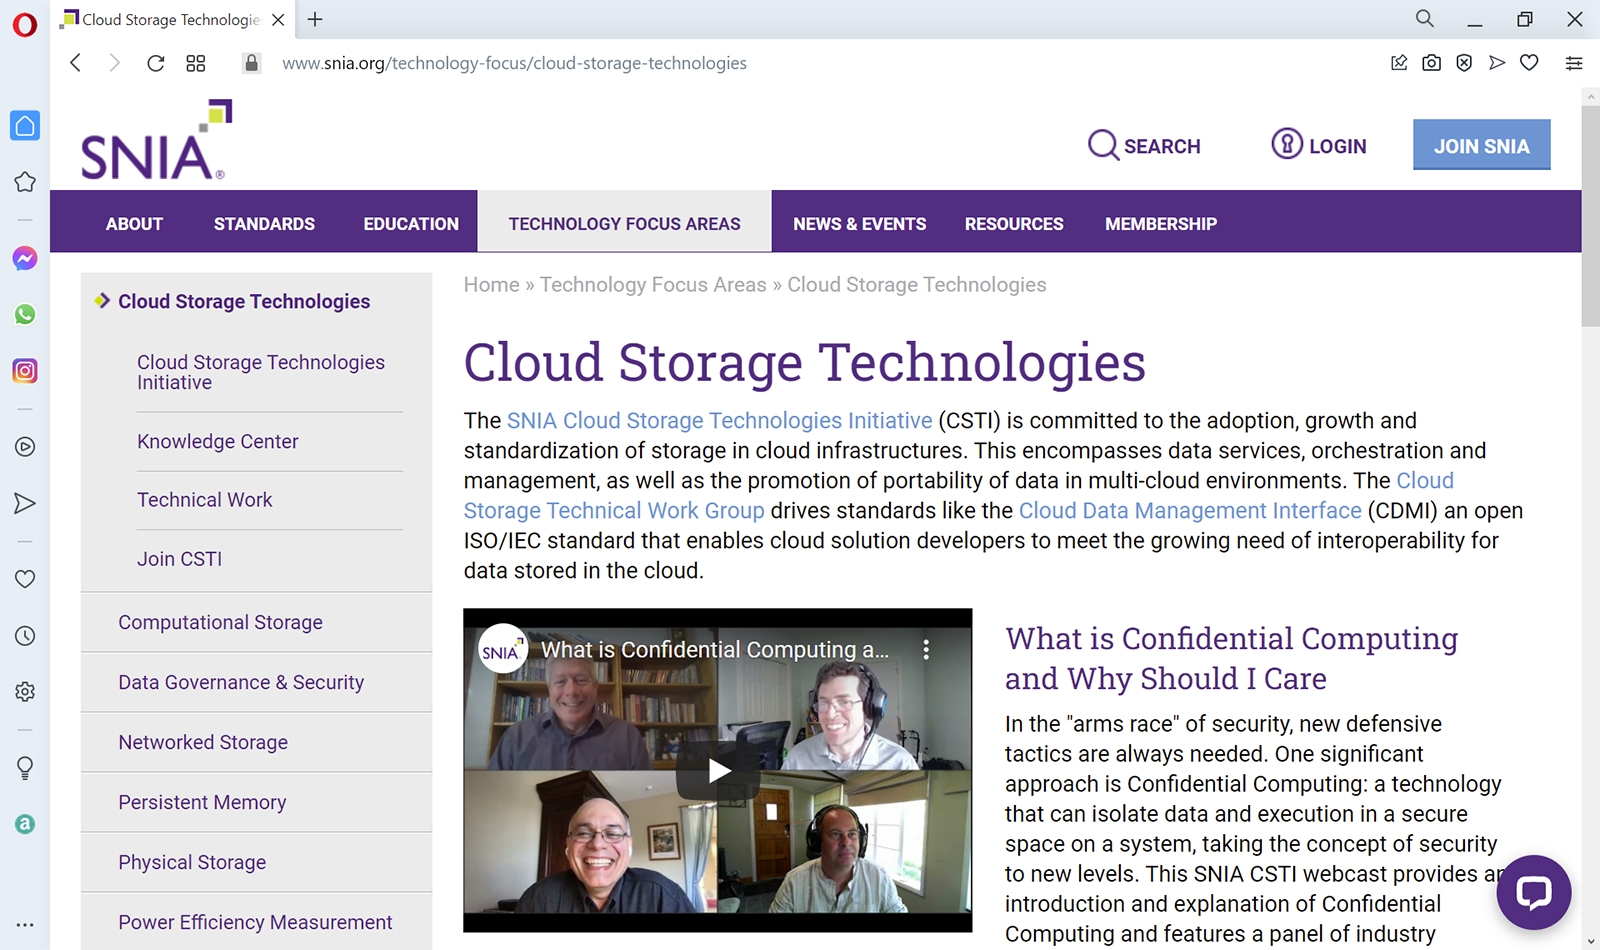 In the top menu of the page, Technology Focus Areas is selected. About, Standards, Education, News and Events, Resources, and Membership are the other menus on the top. In the left pane, the following are listed under Cloud Storage Technologies: Cloud Storage Technologies Initiative, Knowledge Center, Technical Work, and Join C S T I. The other topics of the left pane are listed as follows: Computational Storage, Data Governance and Security, Networked Storage, Persistent Memory, Physical Storage, and Power Efficiency Measurement. The content pane is titled Cloud Storage Technologies and reads as follows: The S N I A Cloud Storage Technologies Initiative (C S T I) is committed to the adoption, growth and standardization of storage in cloud infrastructures. This encompasses data services, orchestration and management, as well as the promotion of portability of data in multi-cloud environments. The Cloud Storage Technical Work Group drives standards like the Cloud Data Management Interface (C D M I) an open I S O / I E C standard that enables cloud solution developers to meet the growing need of interoperability for data stored in the cloud. A video is shown with the heading What is Confidential Computing and Why Should I Care and the following text is shown with the same heading: In the “arms race” of security, new defensive tactics are always needed. One significant approach is Confidential Computing: a technology that can isolate data and execution in a secure space on a system, taking the concept of security to new levels. This S N I A C S T I webcast provides an introduction and explanation of Confidential Computing and features a panel of industry.
